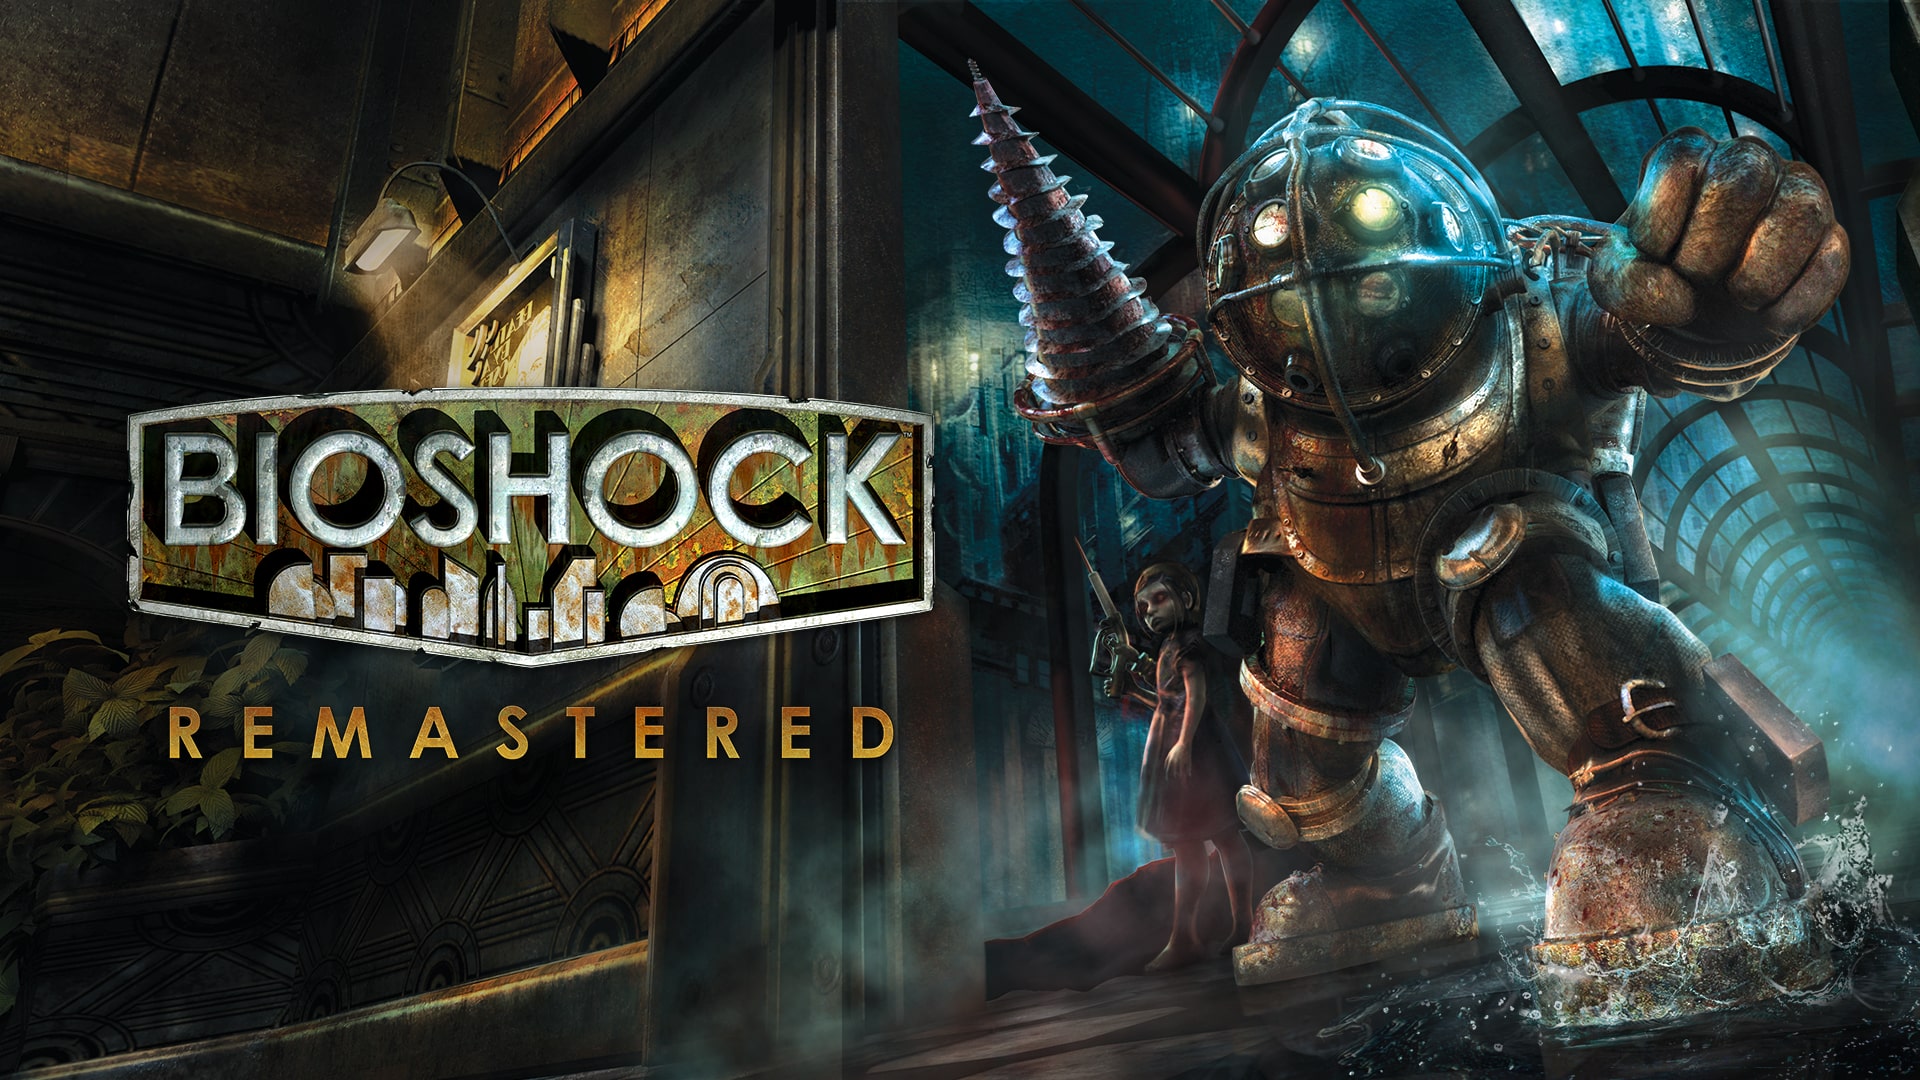 Bioshock Collection (PS4) cheap - Price of $7.42